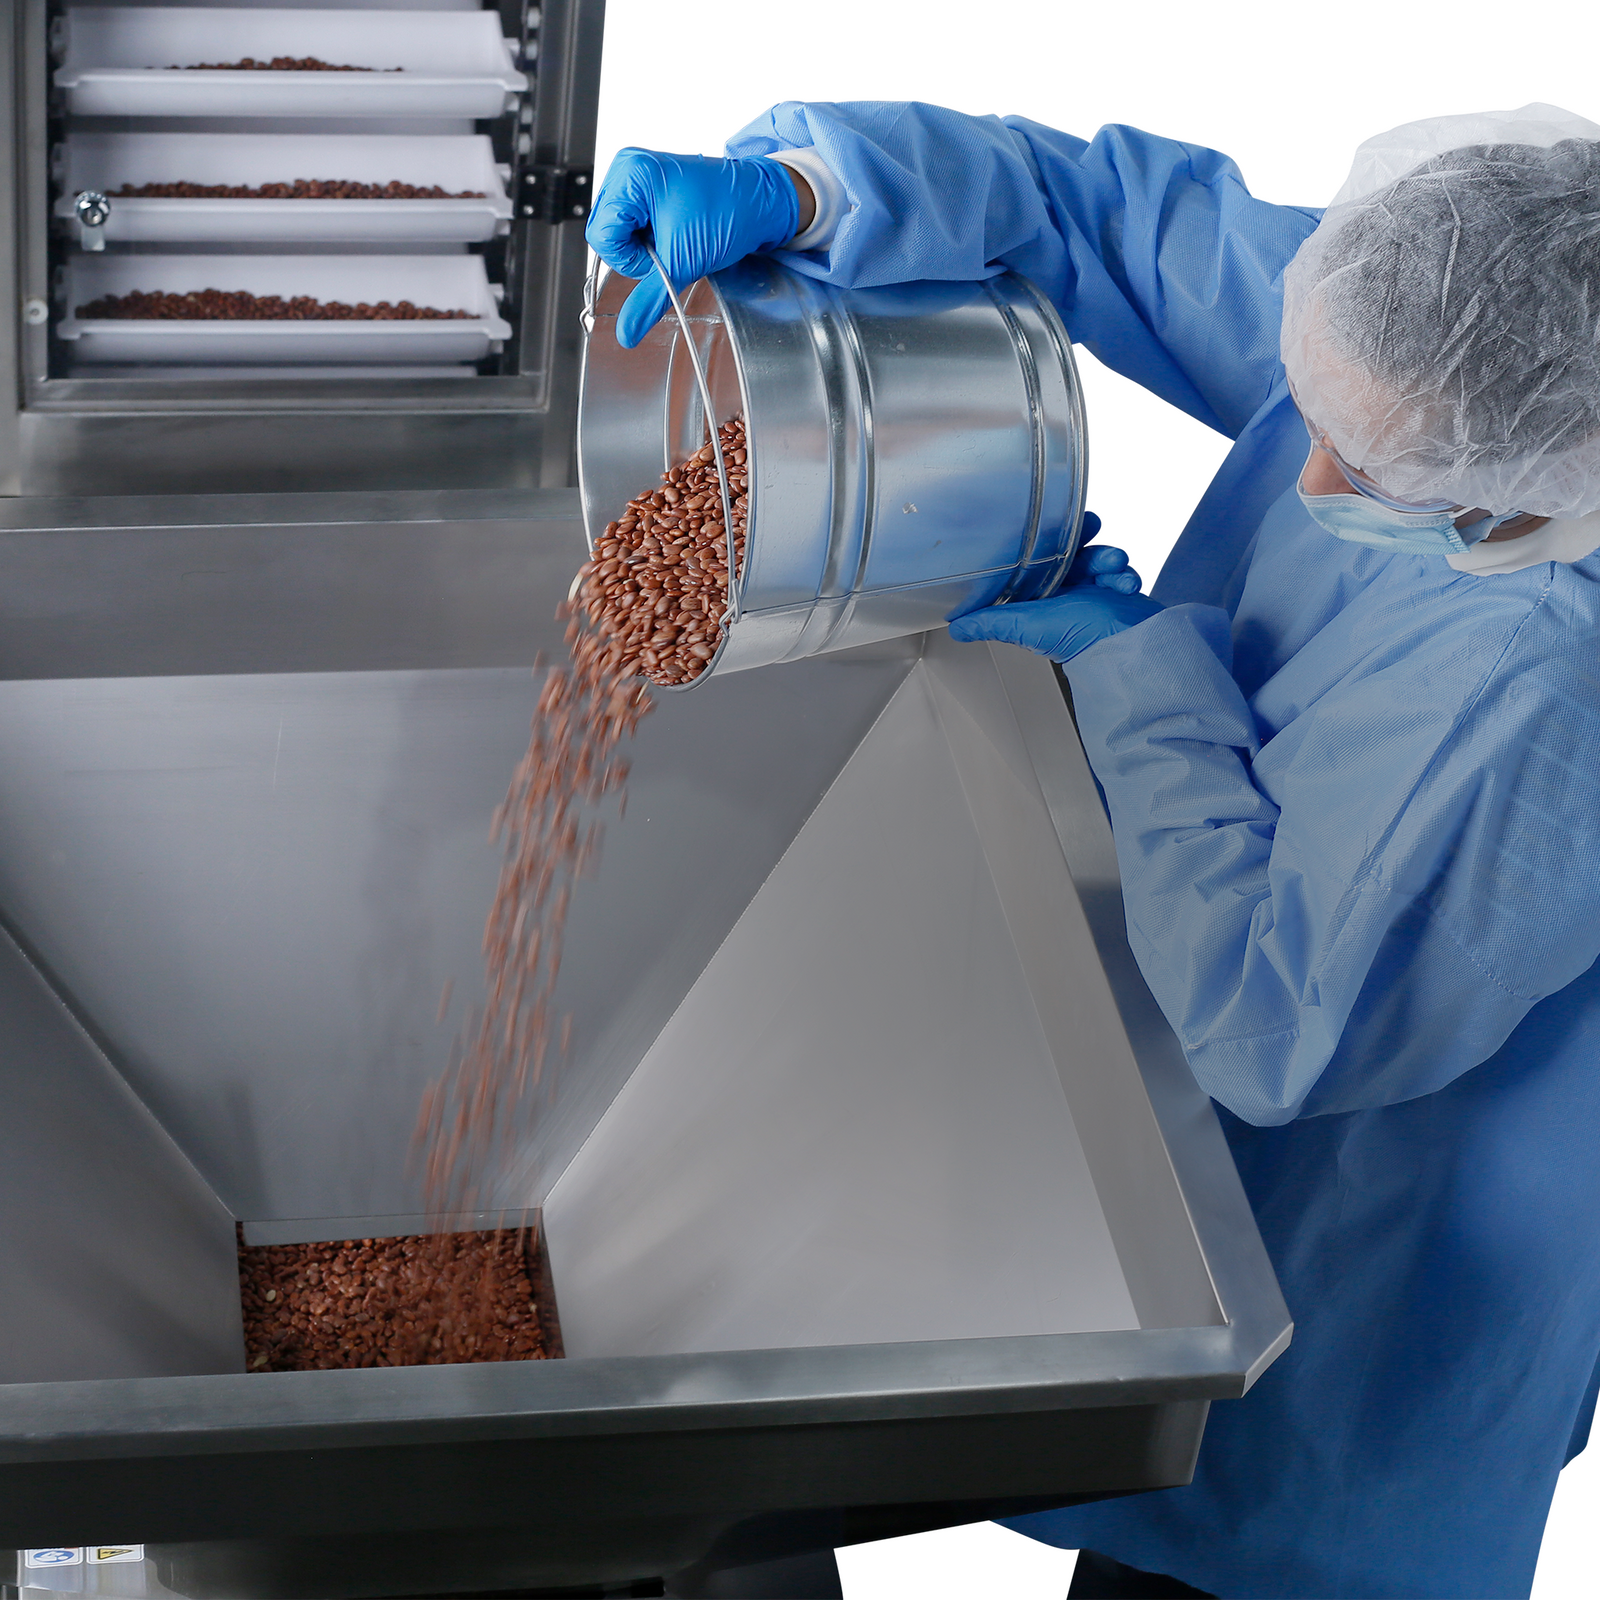 A worker wearing disposable protective equipment dispensing red grains into the hopper of a vibratory feeder positioned next to a Jorestech Motorized Bucket elevator. Beans can be seen transported inside the motorized conveyor